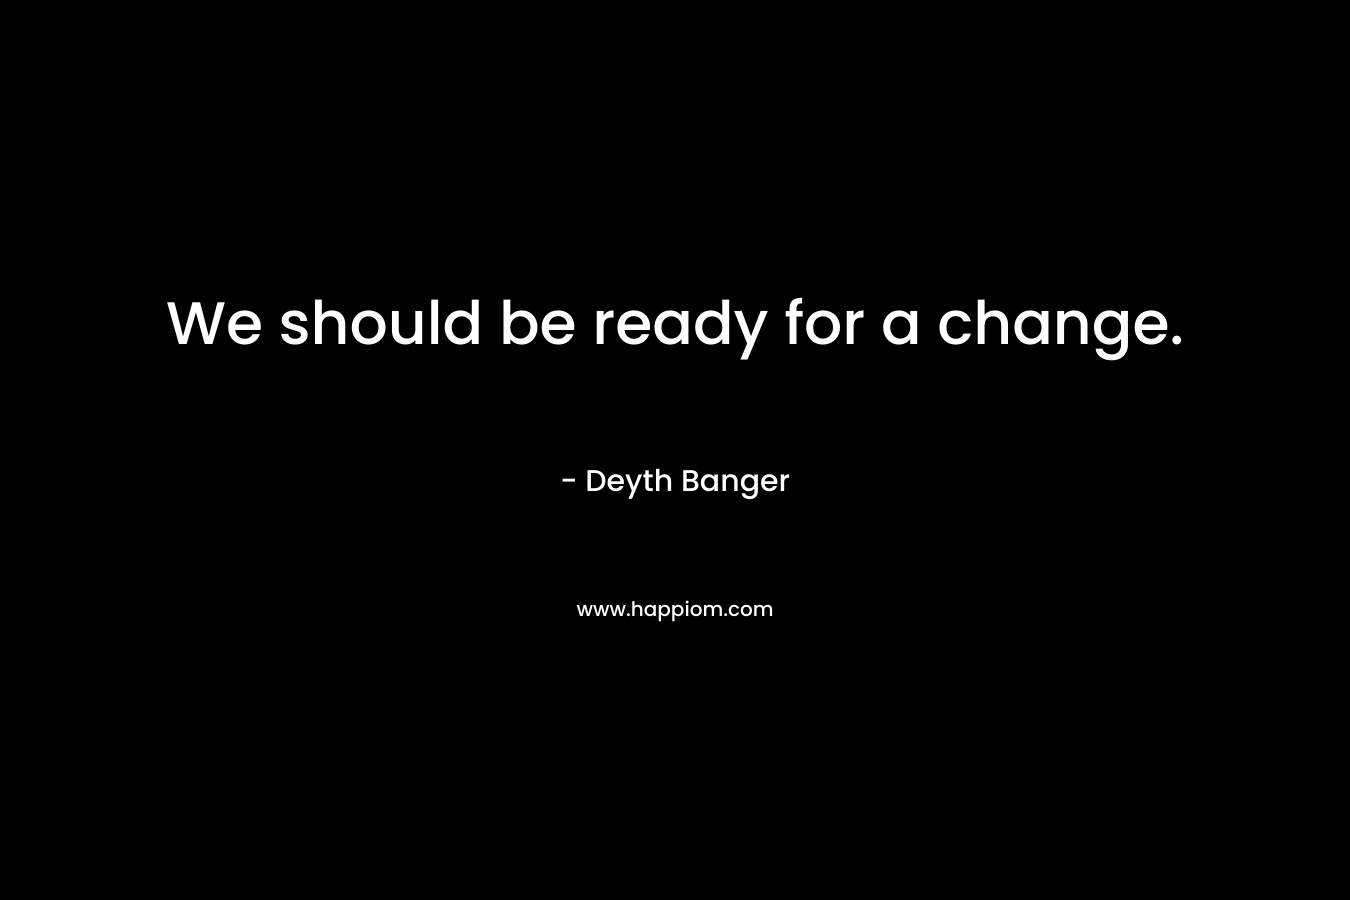 We should be ready for a change.